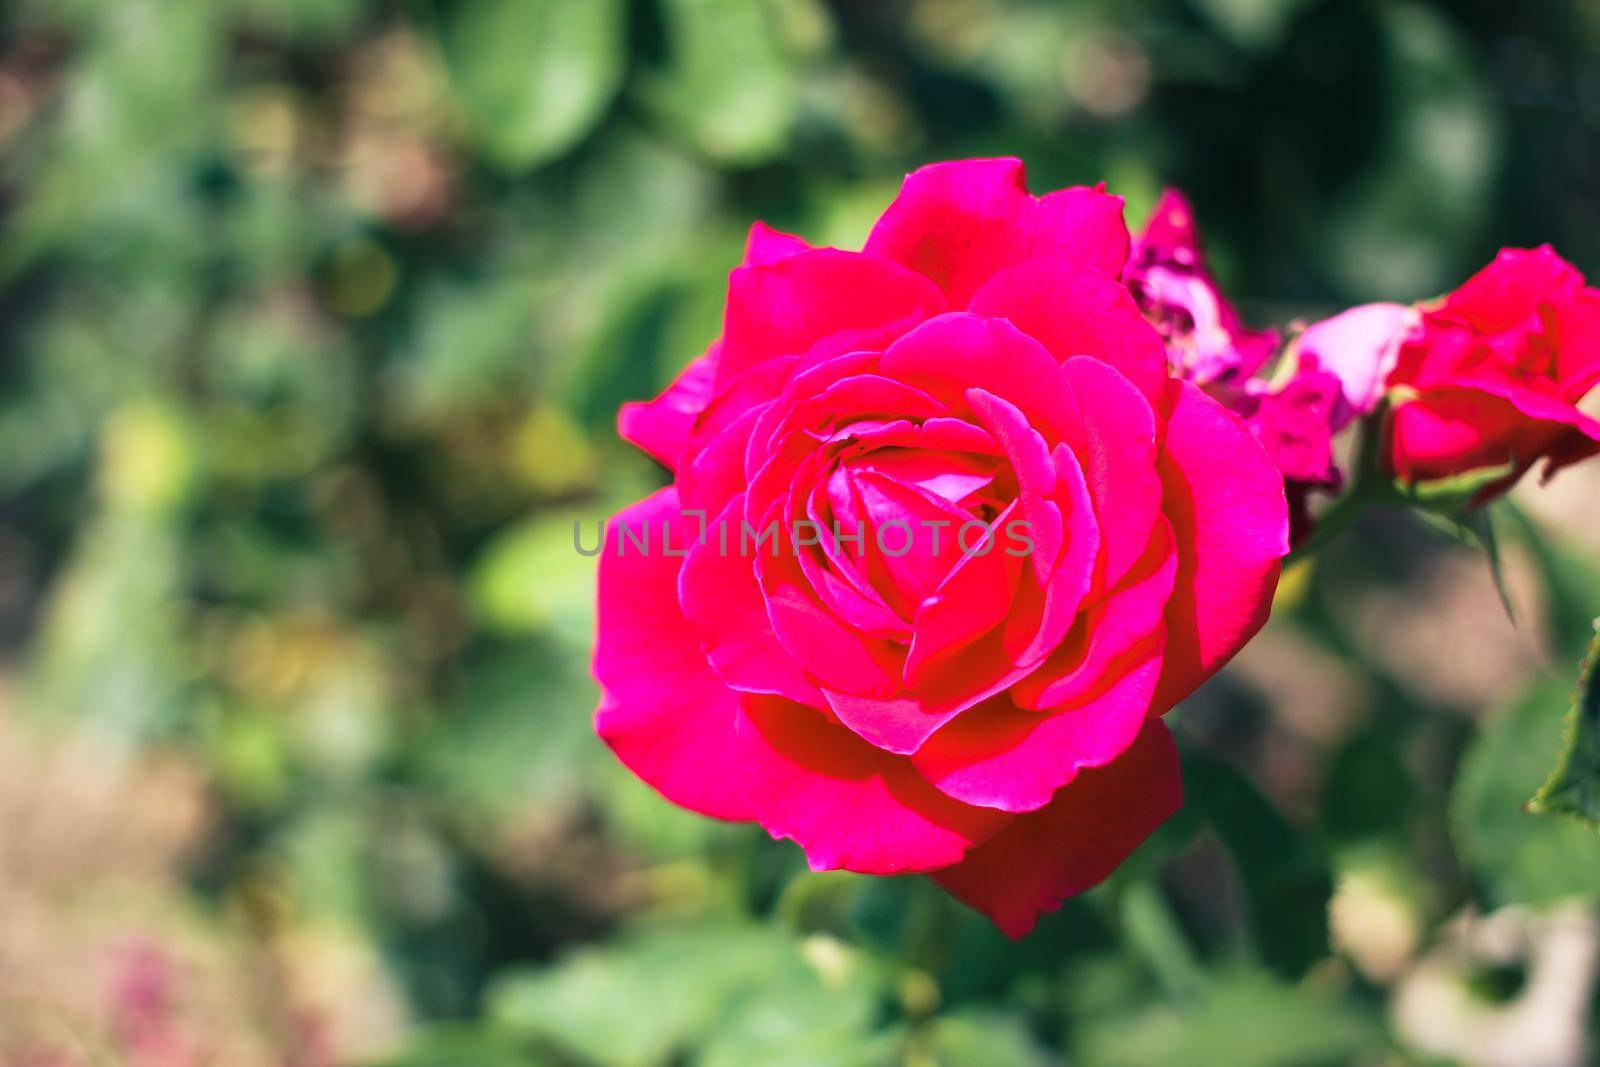 Beautiful Selection Rose Close-up in Summer Sunny Garden. Romantic Floral Bakcground or Greeting Card. High quality photo